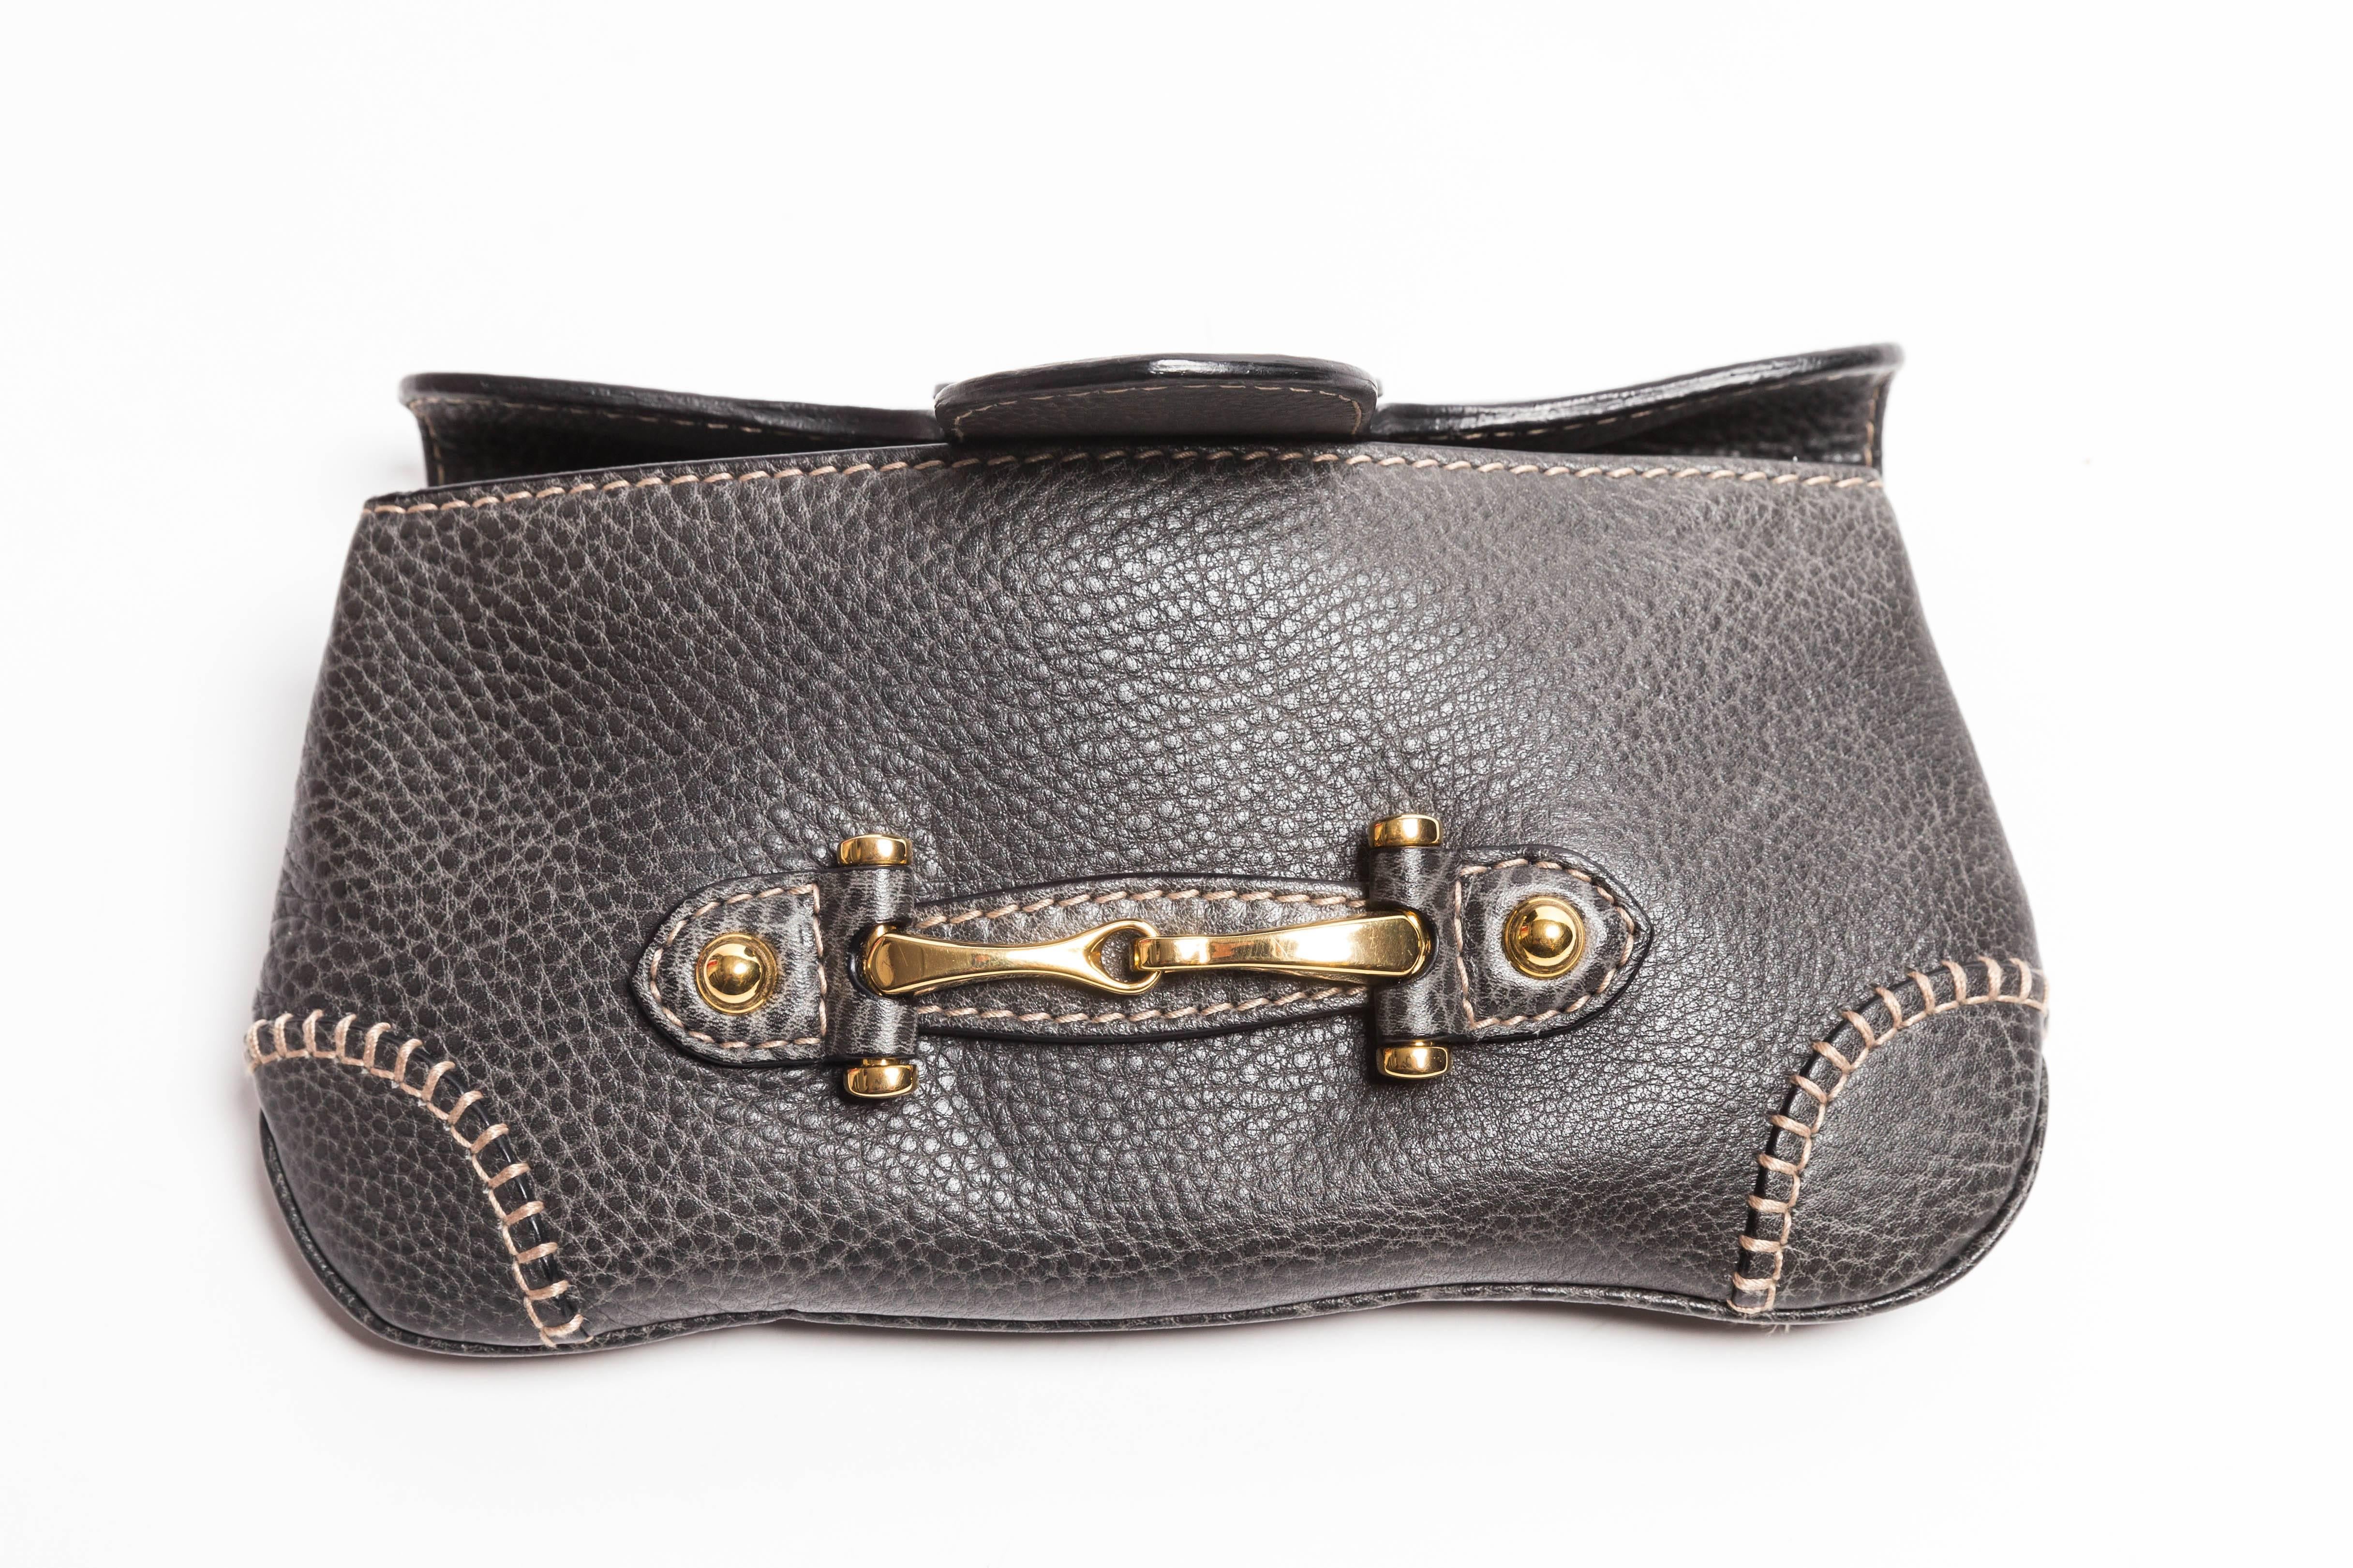  Pebbled Leather Gucci Clutch in Graphite Grey 1